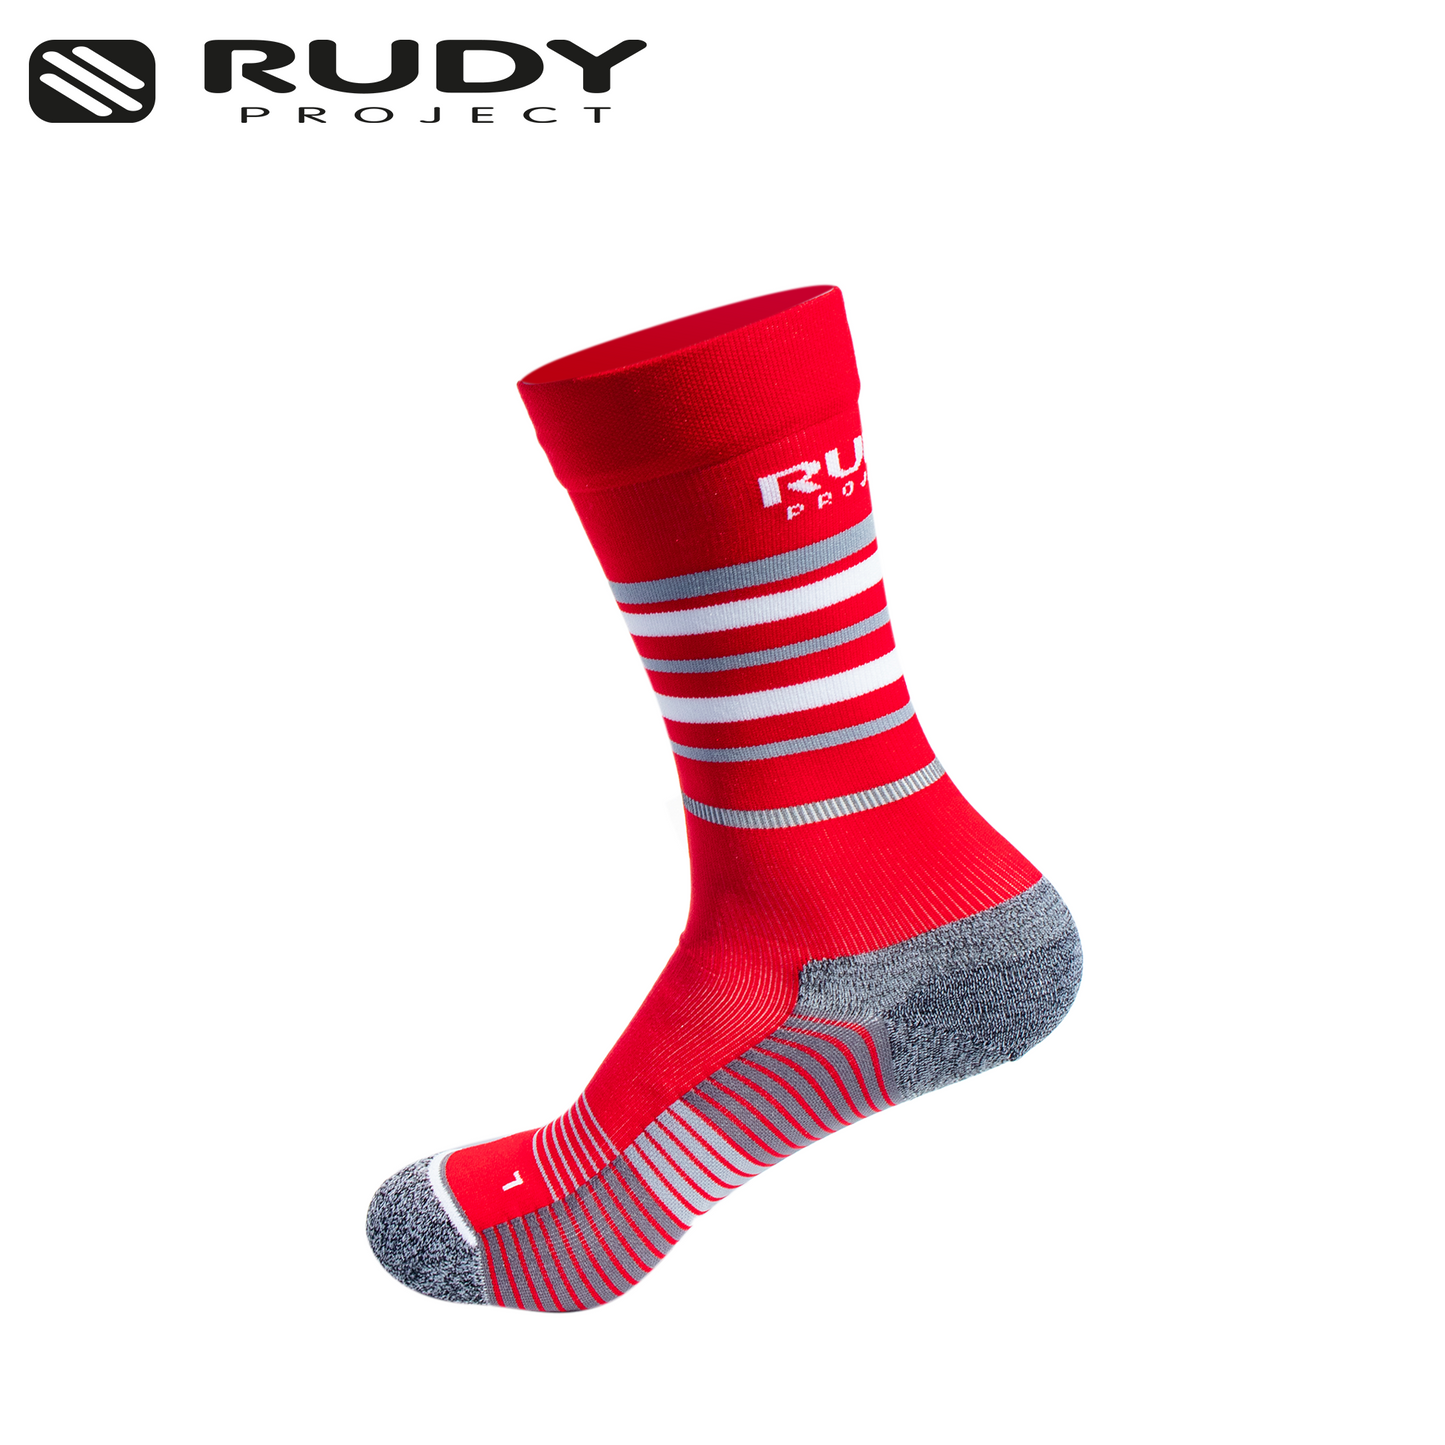 Rudy Project Medium Cut Socks in Red and Yellow